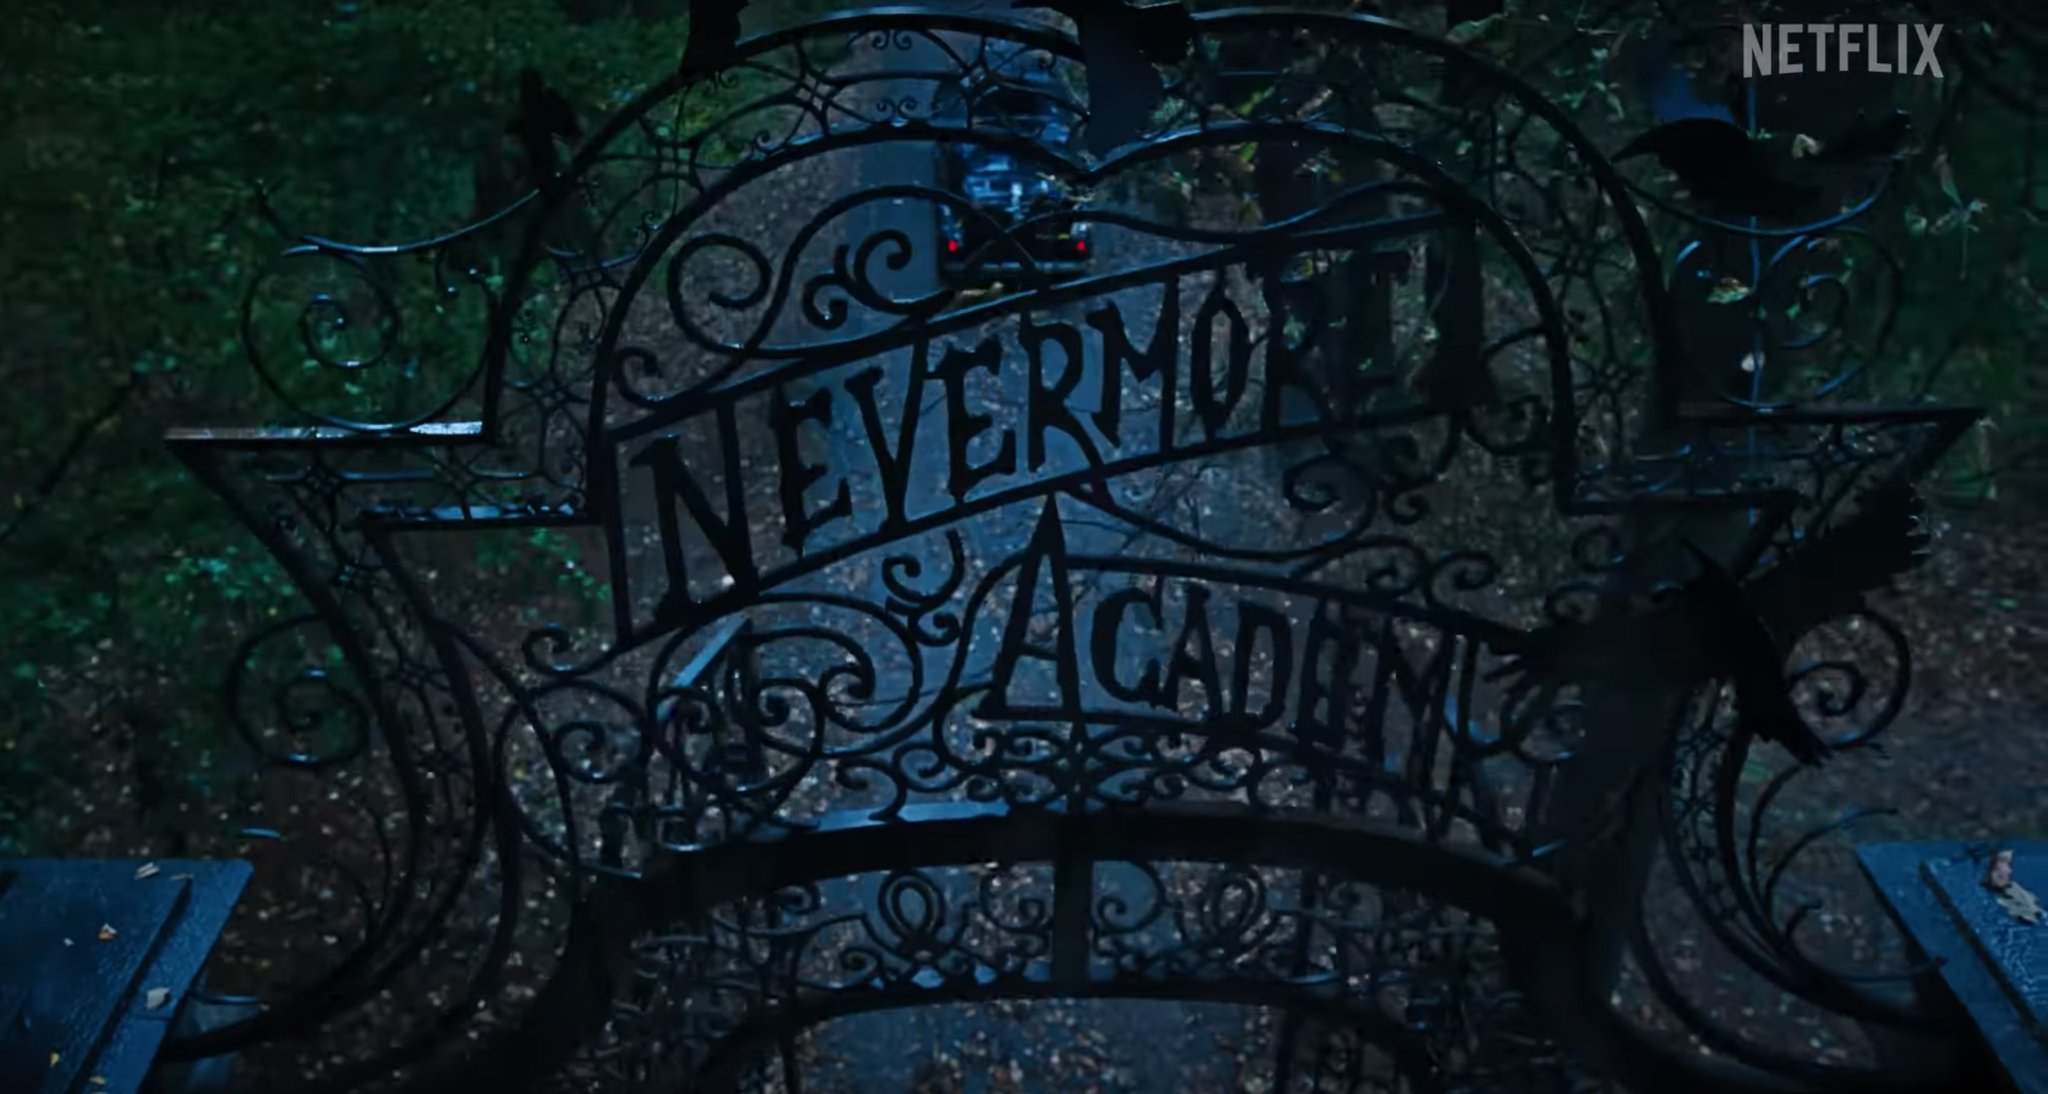 Variety the spinoff, Wednesday Addams attends Nevermore Academy, where she attempts to master her new psychic abilities and solve a murder mystery connected to her family's past